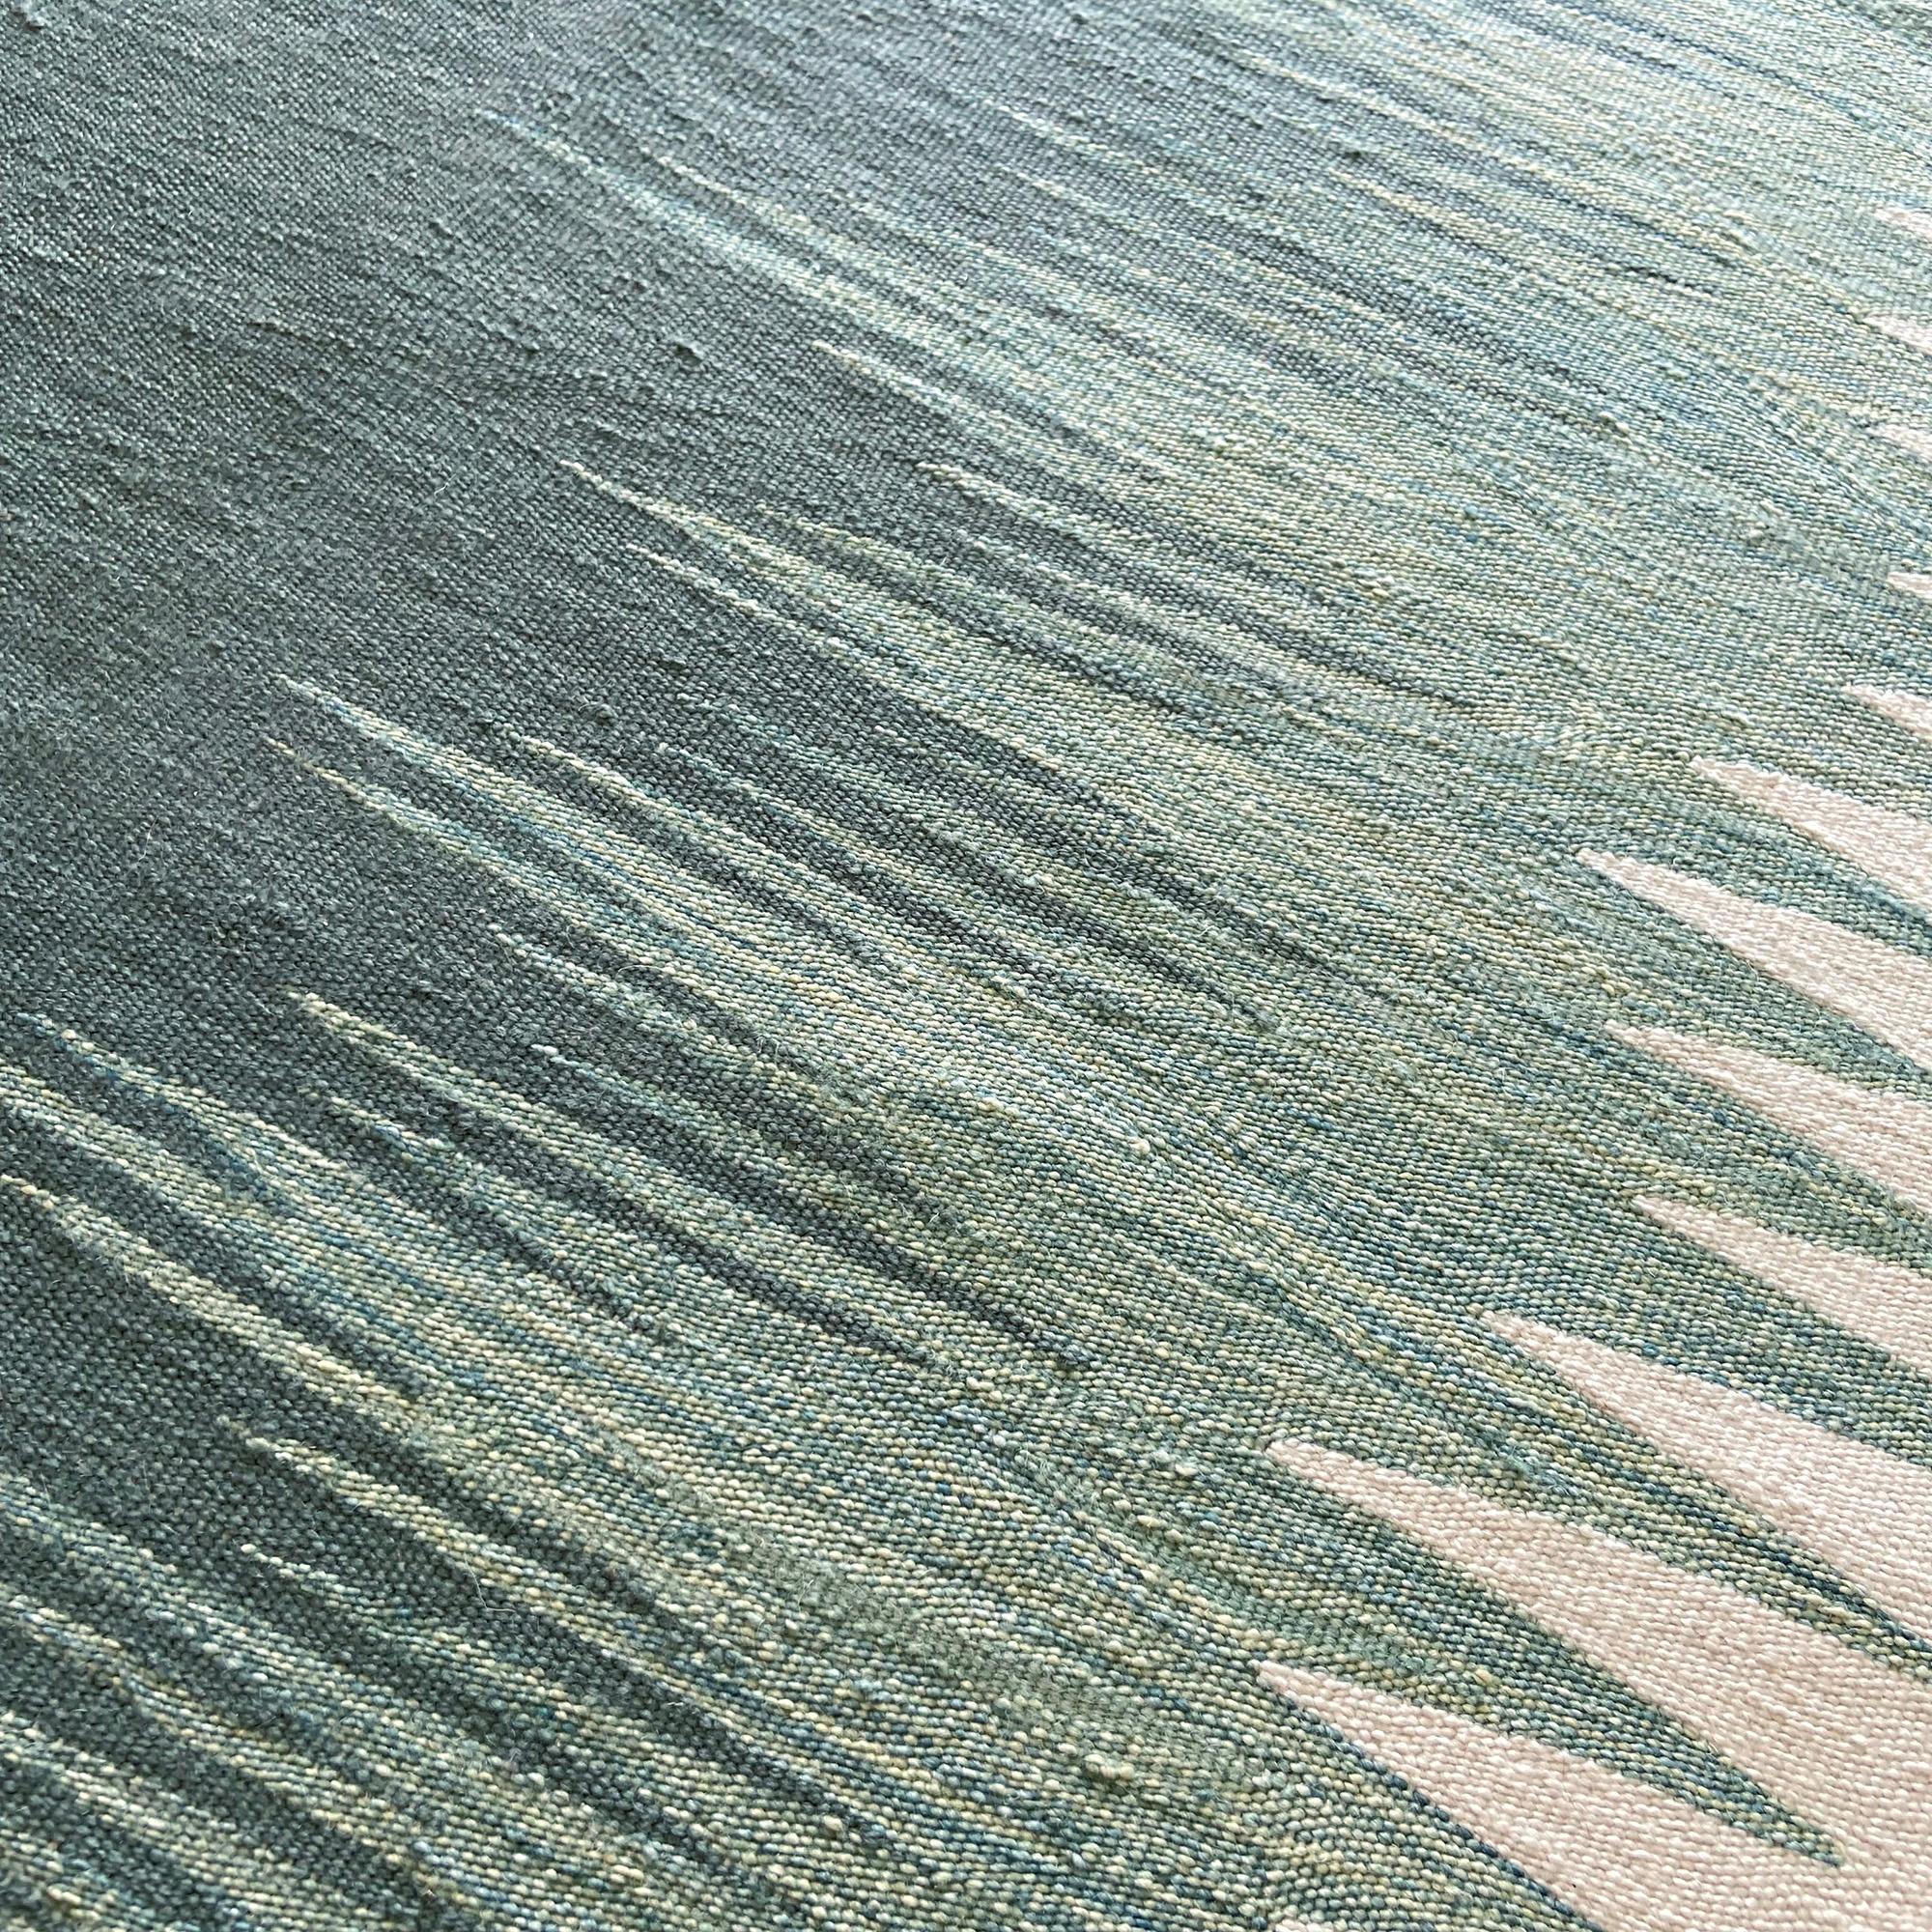 Yakamoz No 4 kilim rug is part of a series of kilims that take their inspiration from the poetry of light reflections on the sea surface. The abstract patterns, which are reminiscent of alternating color transitions created by reflected light, are